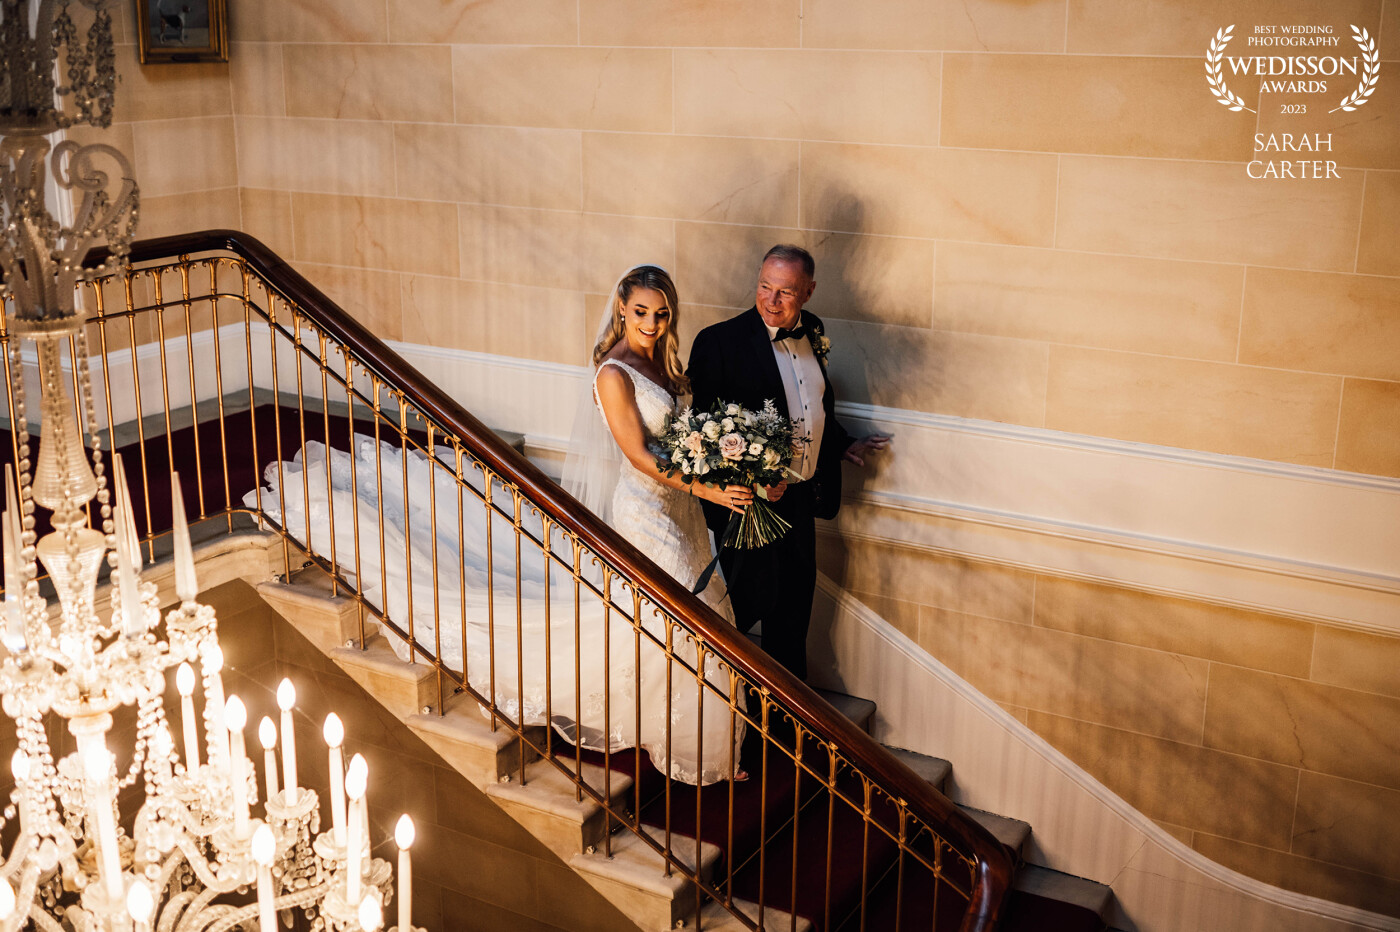 There were a few shots of the bride and her father walking down these stairs but this one is my favourite. The way he is looking at her when there is so much going on downstairs. So many different thoughts going through both their minds. I don't think he could have been any prouder than in that moment.